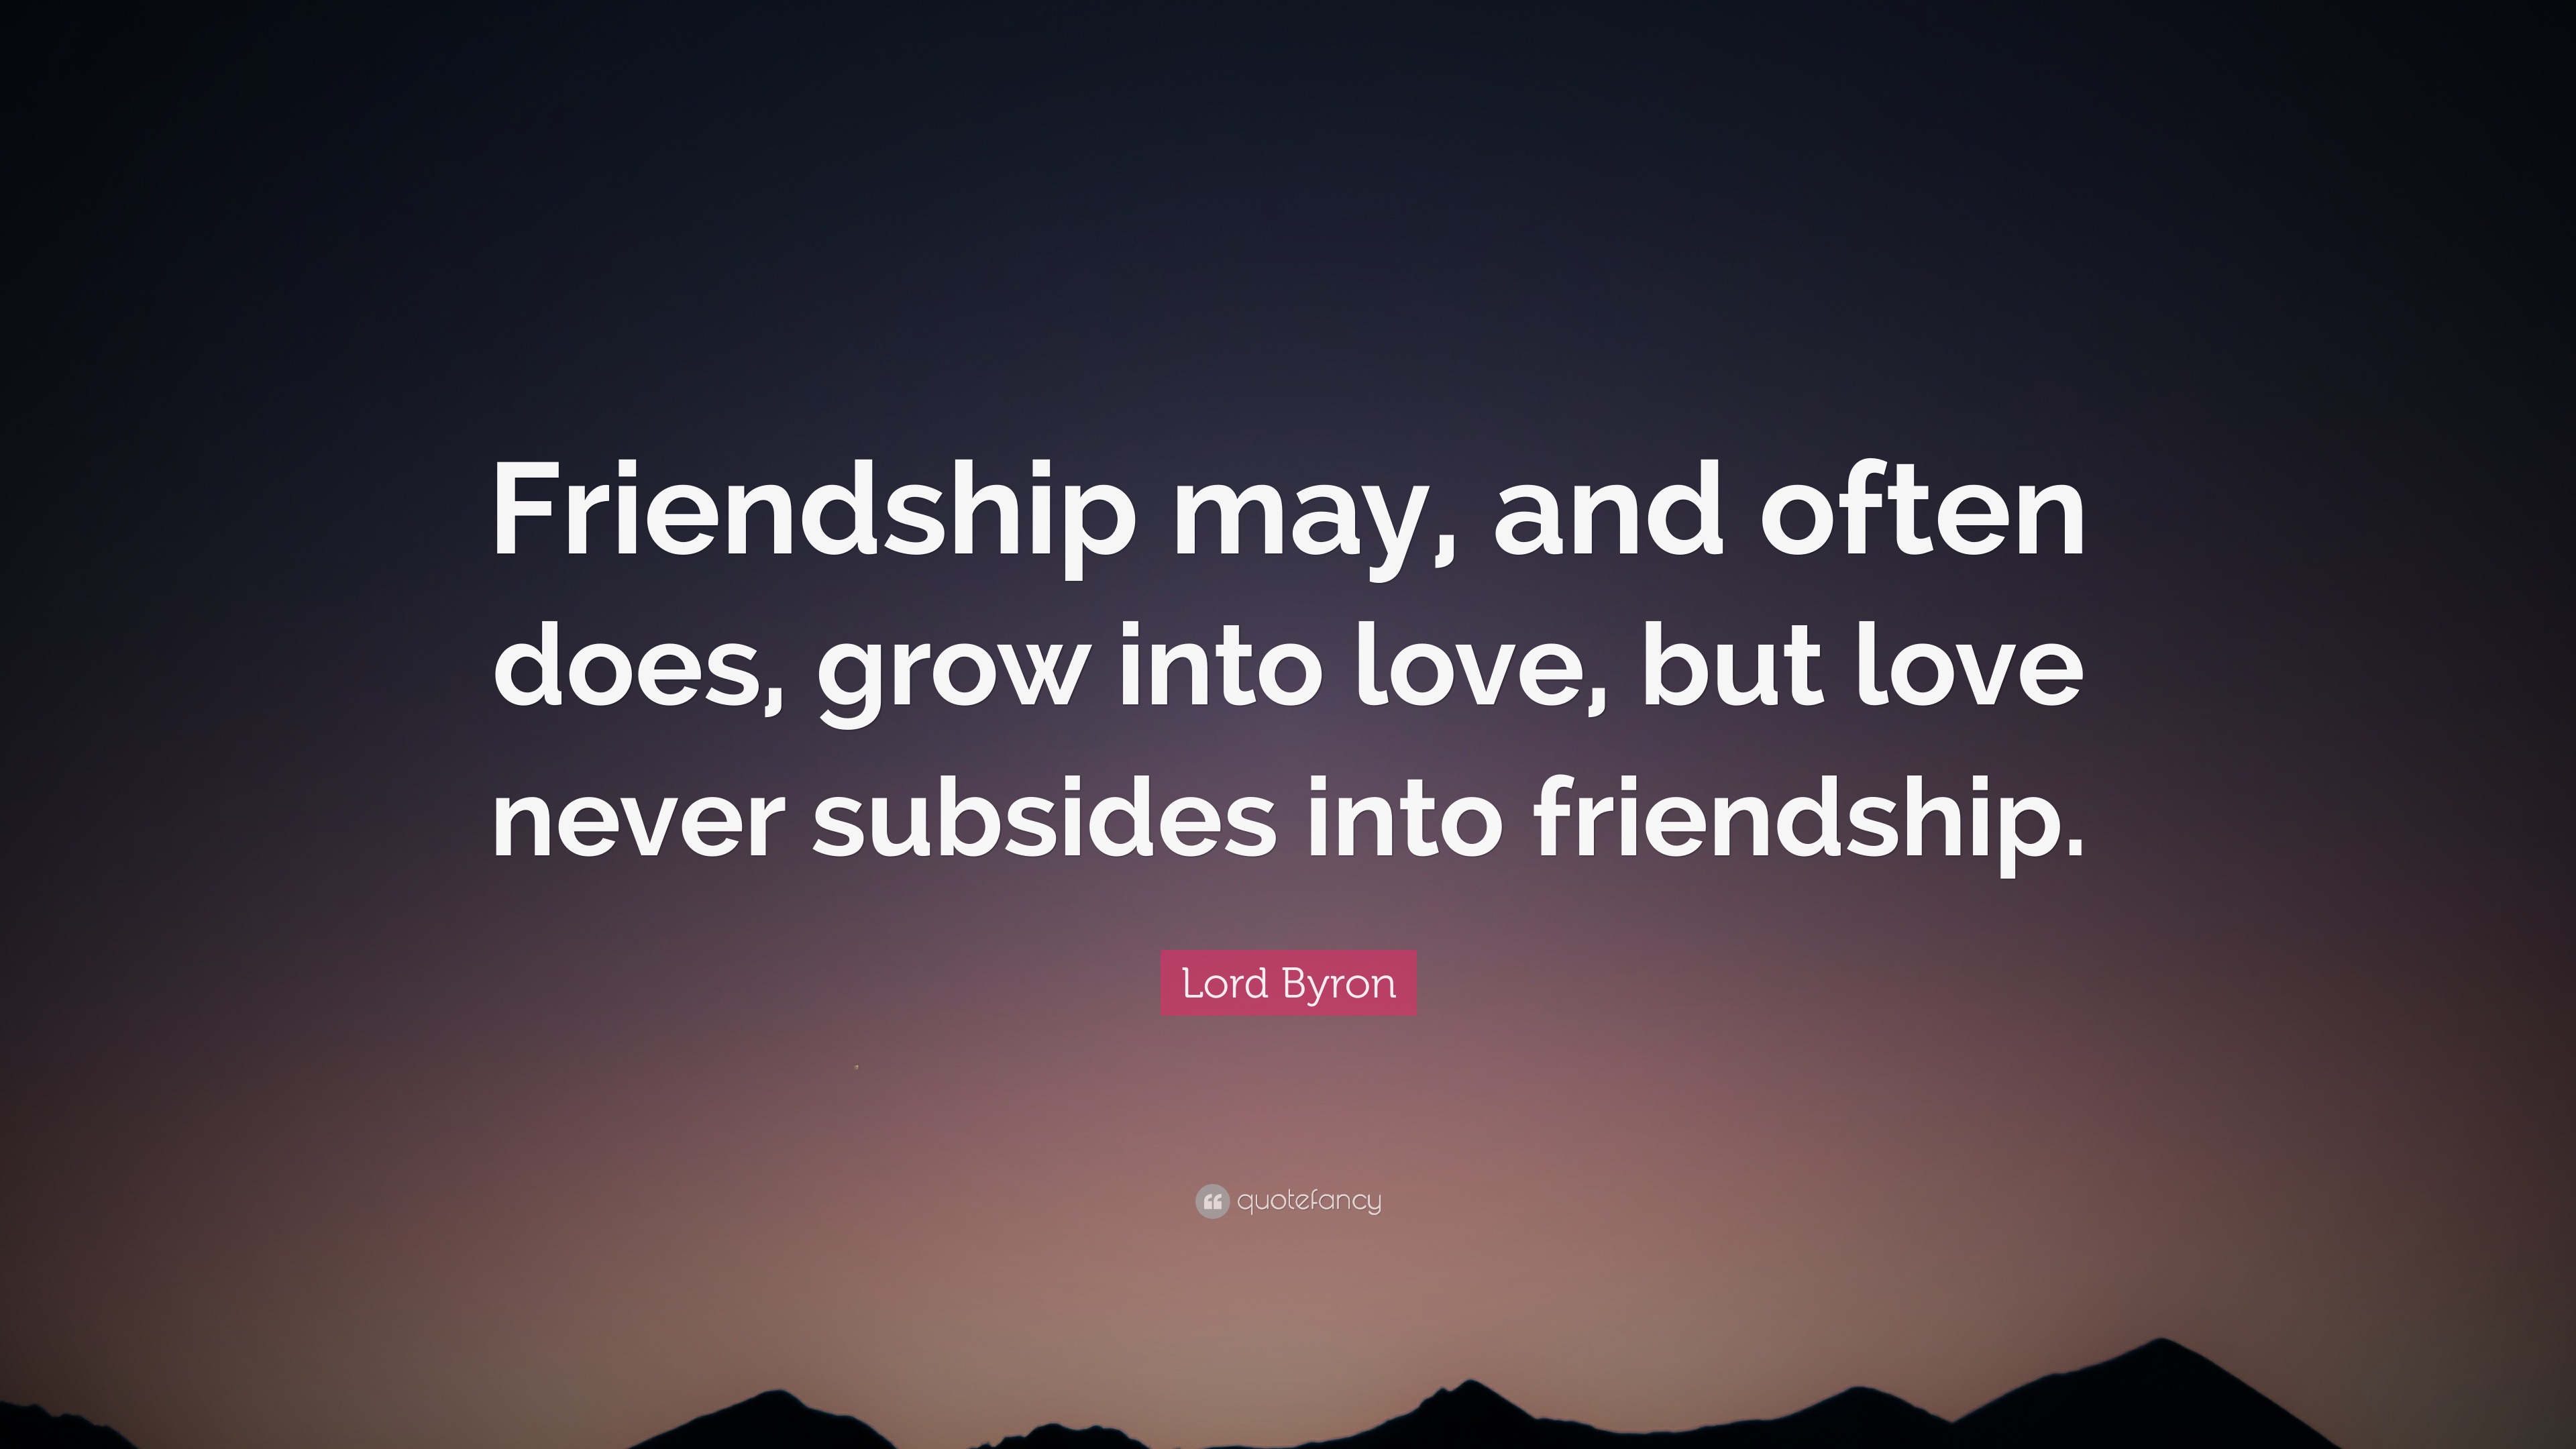 Lord Byron Quote “Friendship may and often does grow into love